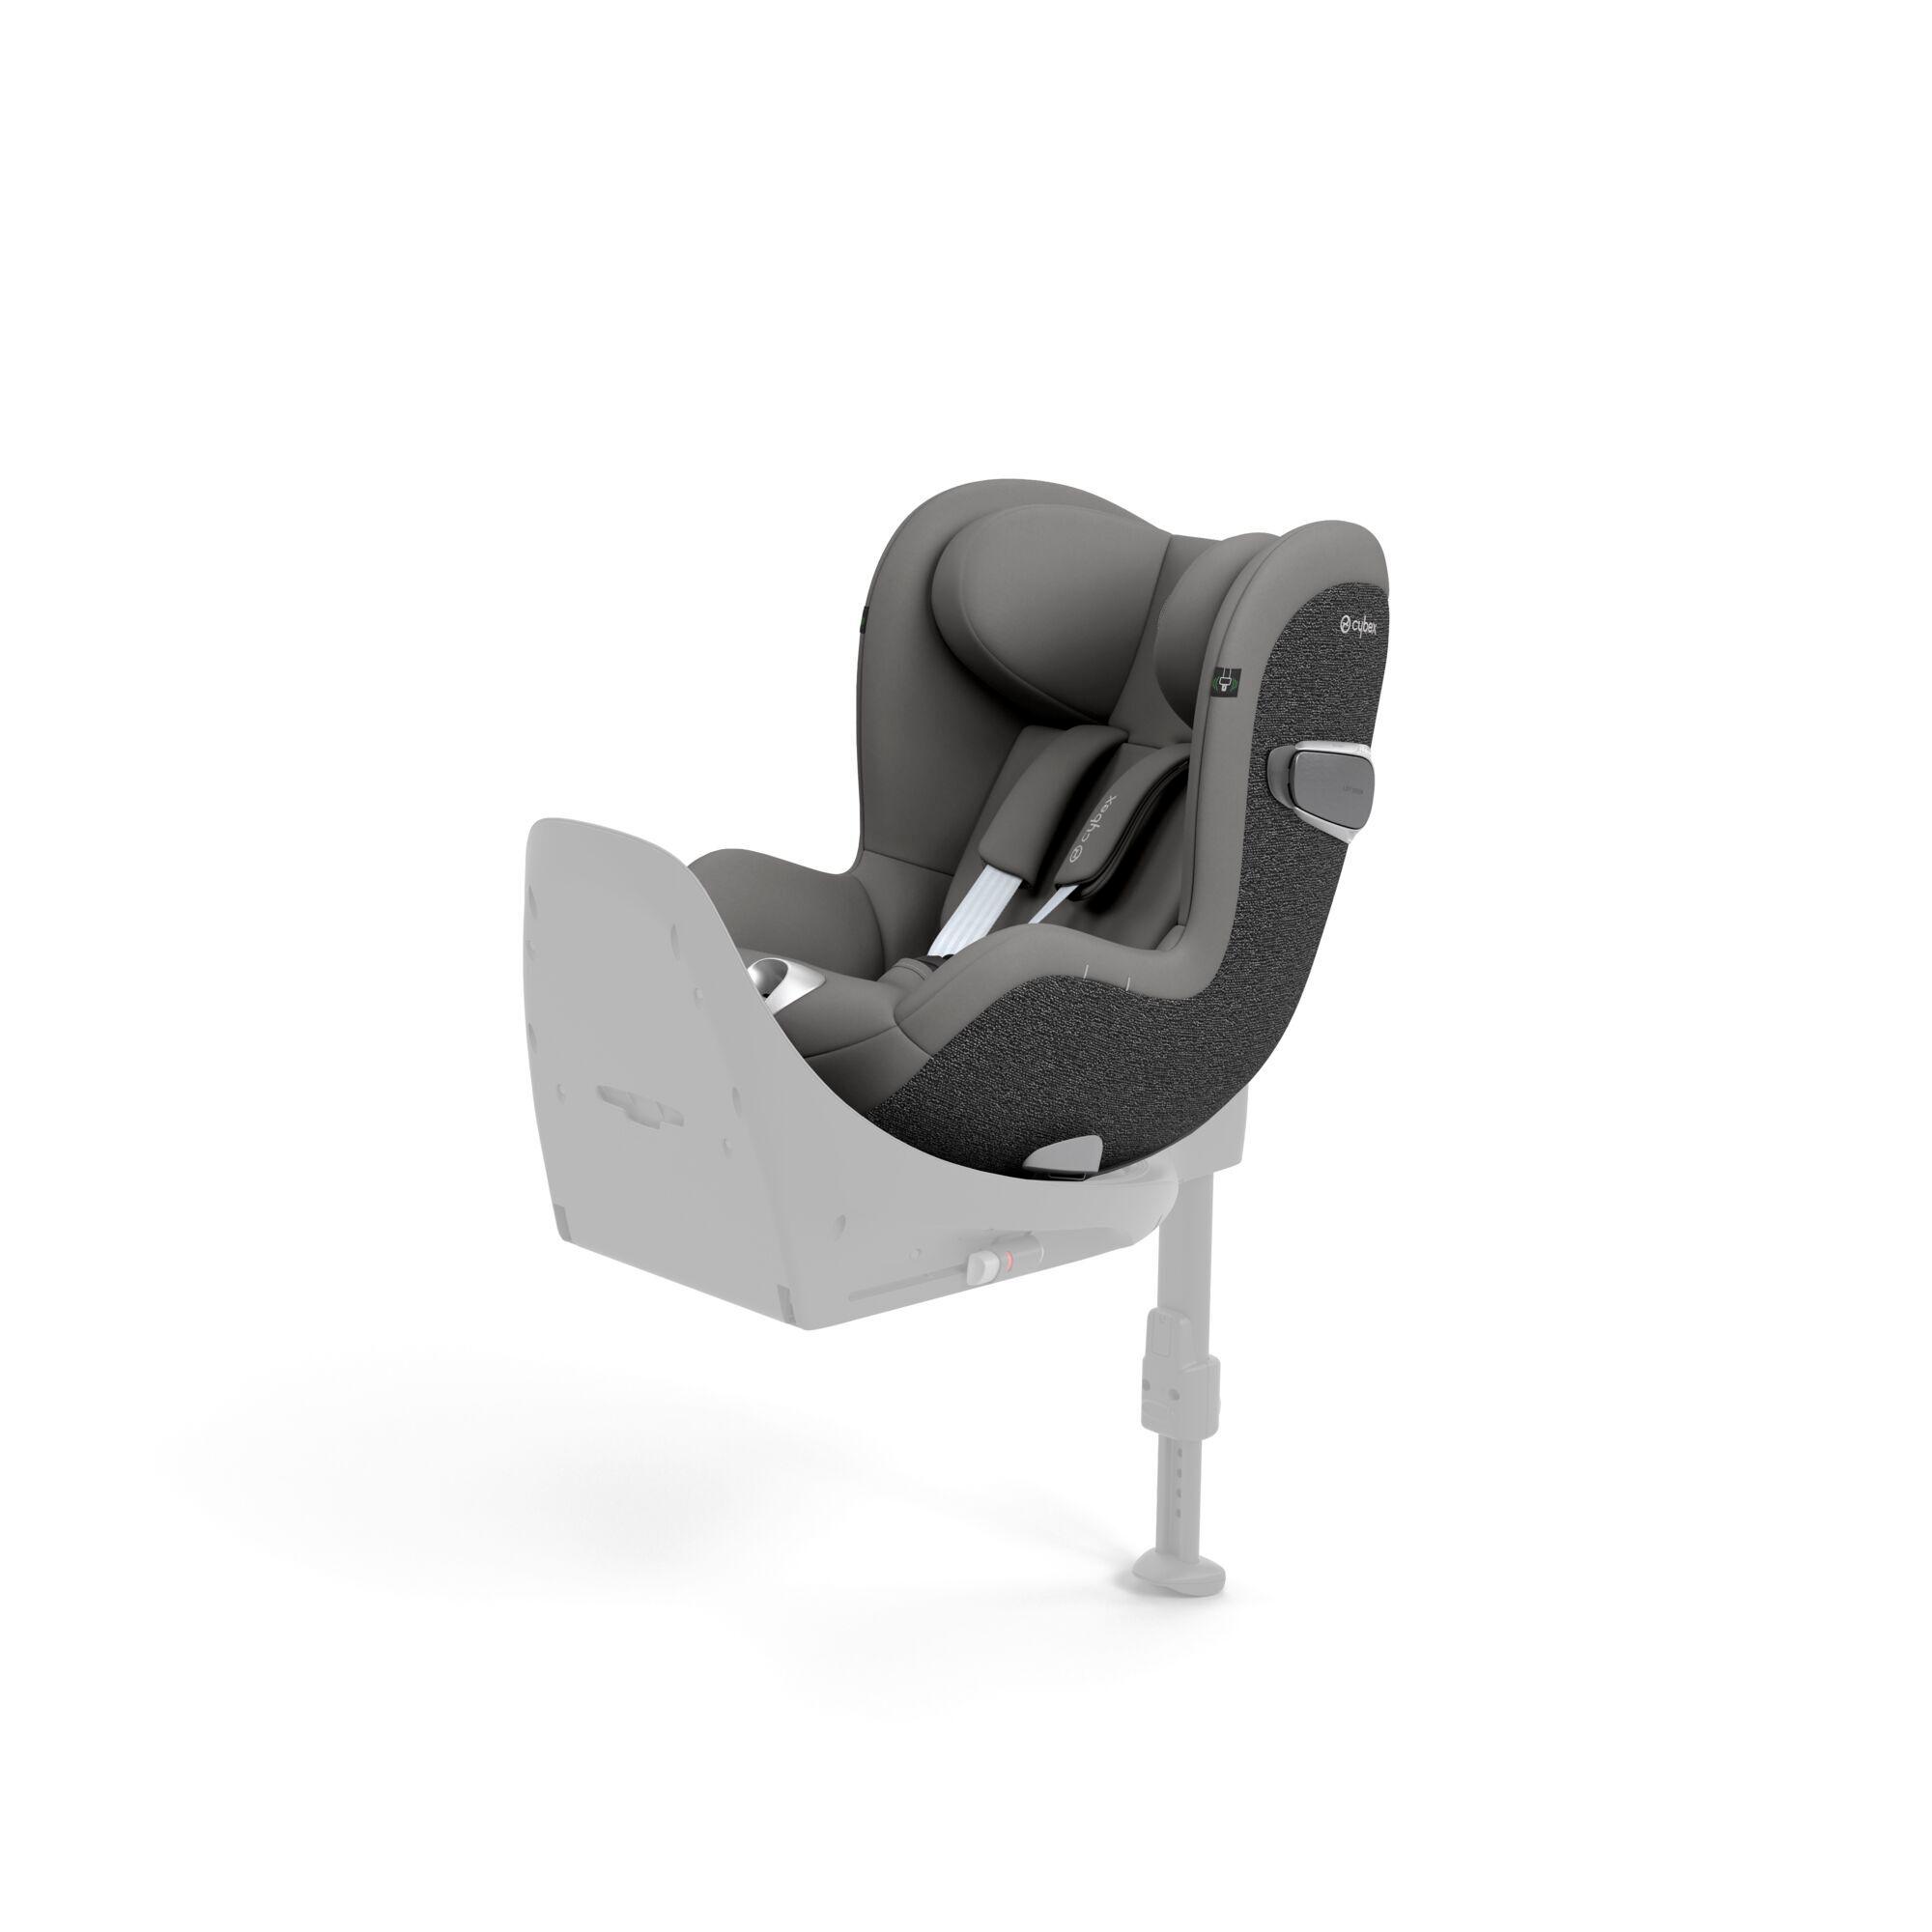 CYBEX Sirona T i-Size car seat in mirage grey, featuring an ergonomic design with advanced safety features and a secure installation system with a stabilizing support leg.